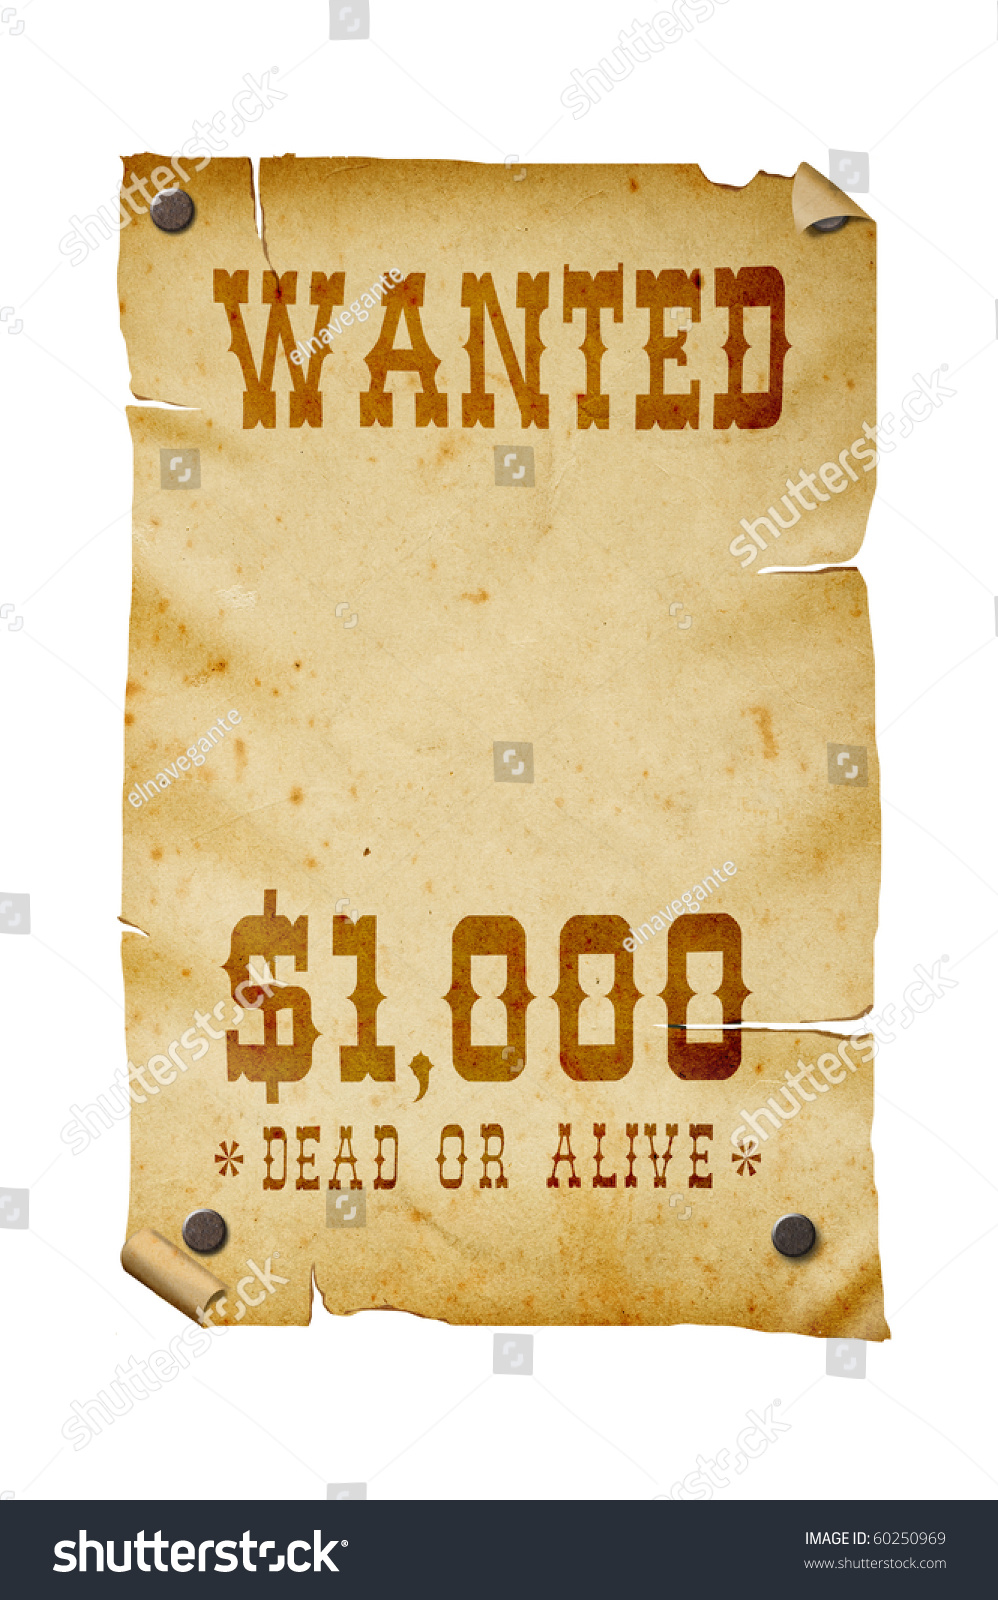 Old Western Wanted Sign Isolated On Stock Photo 60250969 | Shutterstock